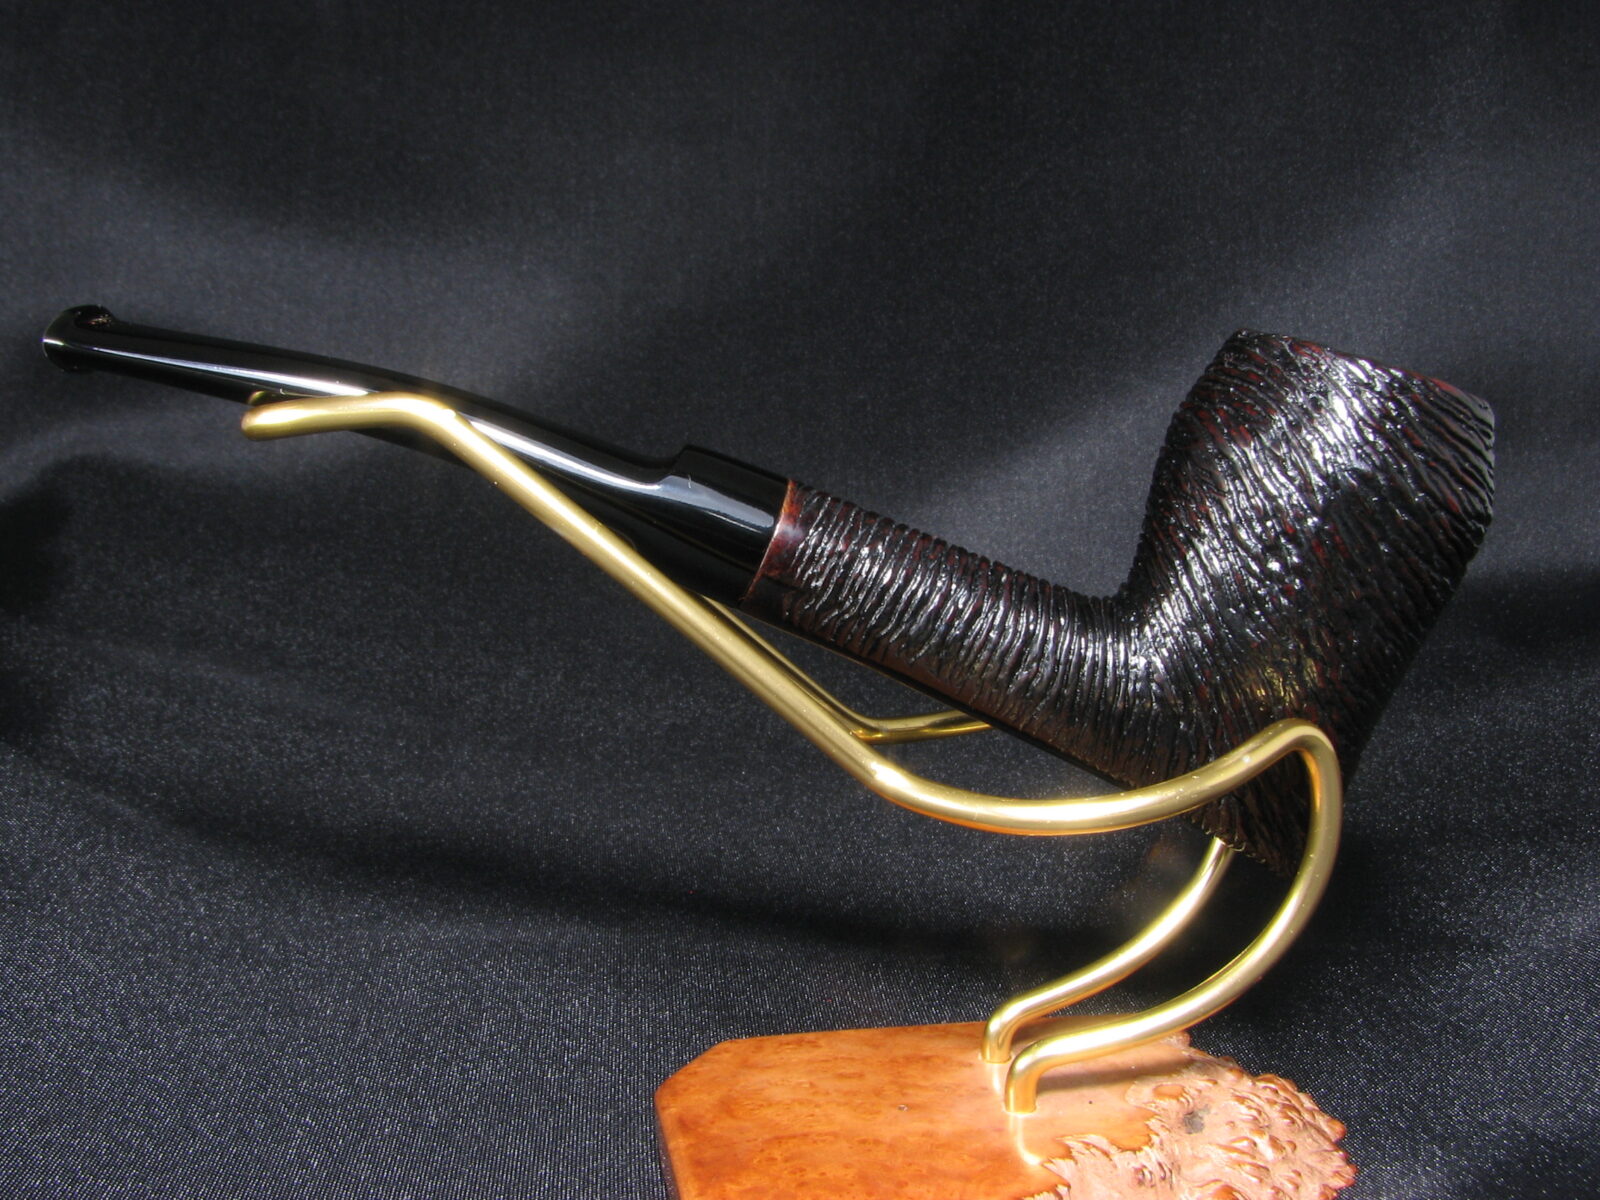 DR. GRABOW Starfire - Very Keen on Pipes